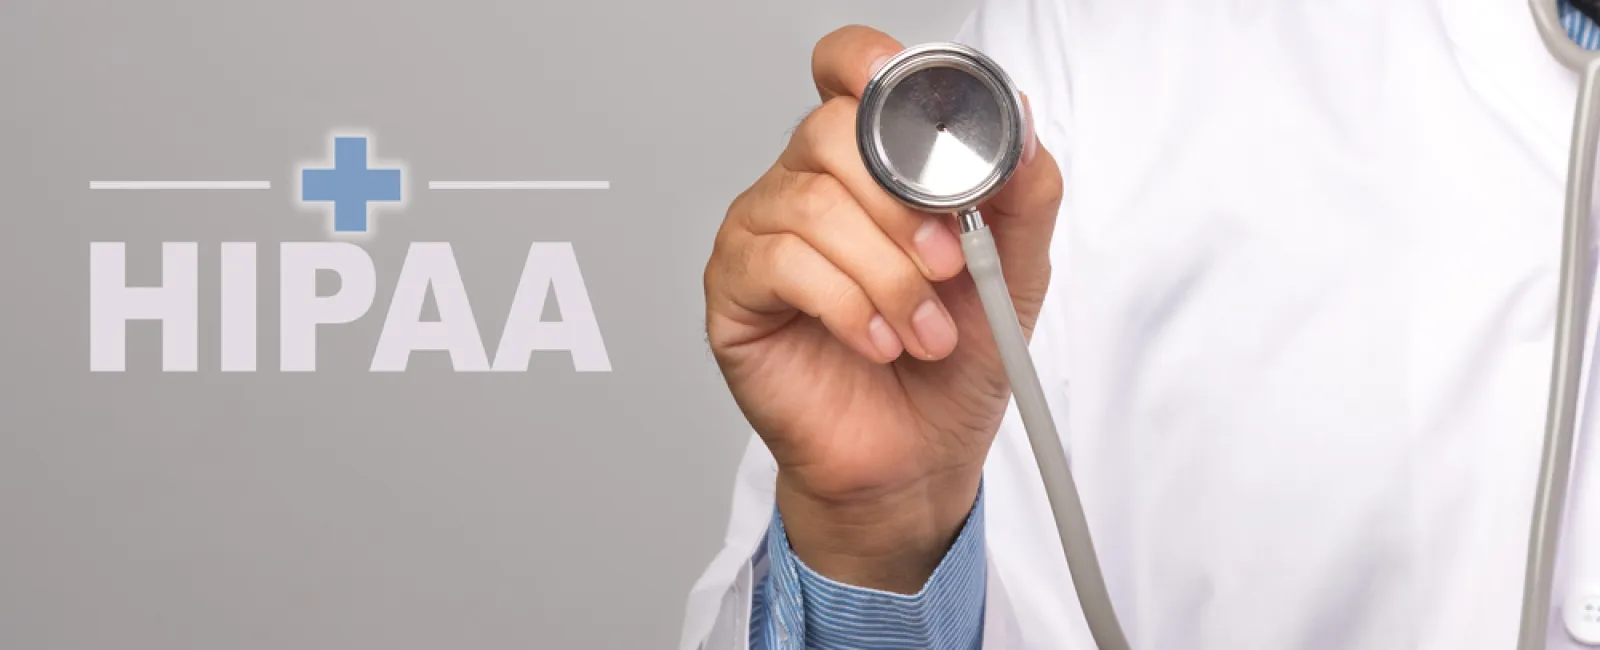 10 Requirements and Prohibitions the OCR can Enforce of Business Associates under HIPAA Rules